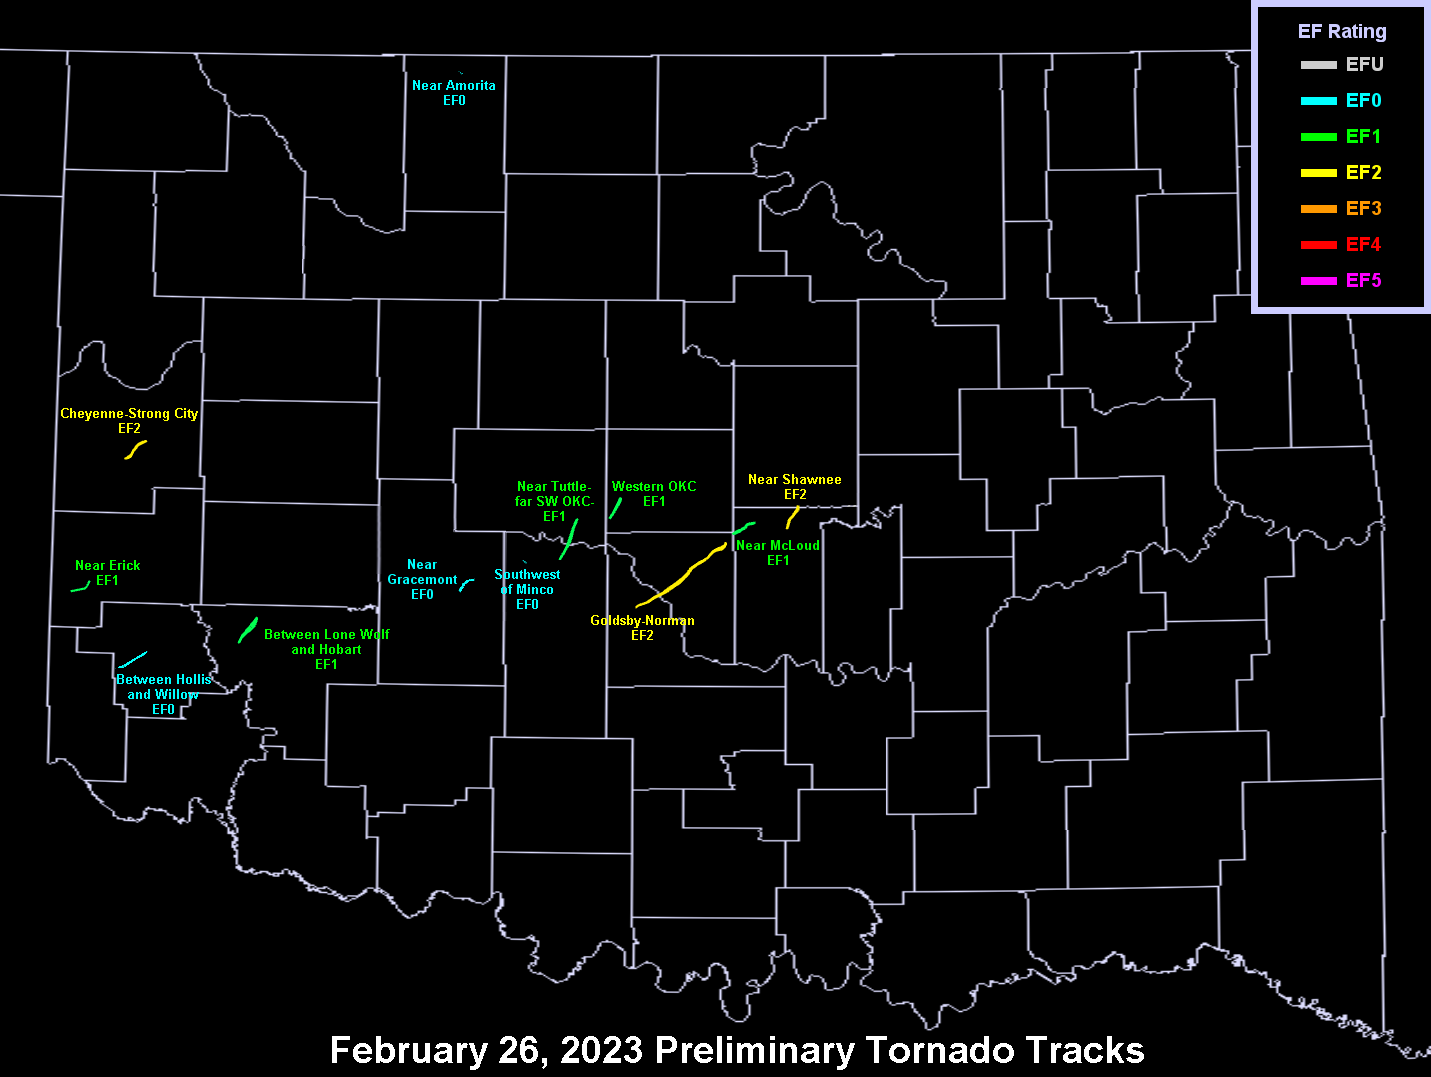 Areas Where Storm Surveys Were Conducted on February 27, 2023 and 5 Tornadoes Were Confirmed